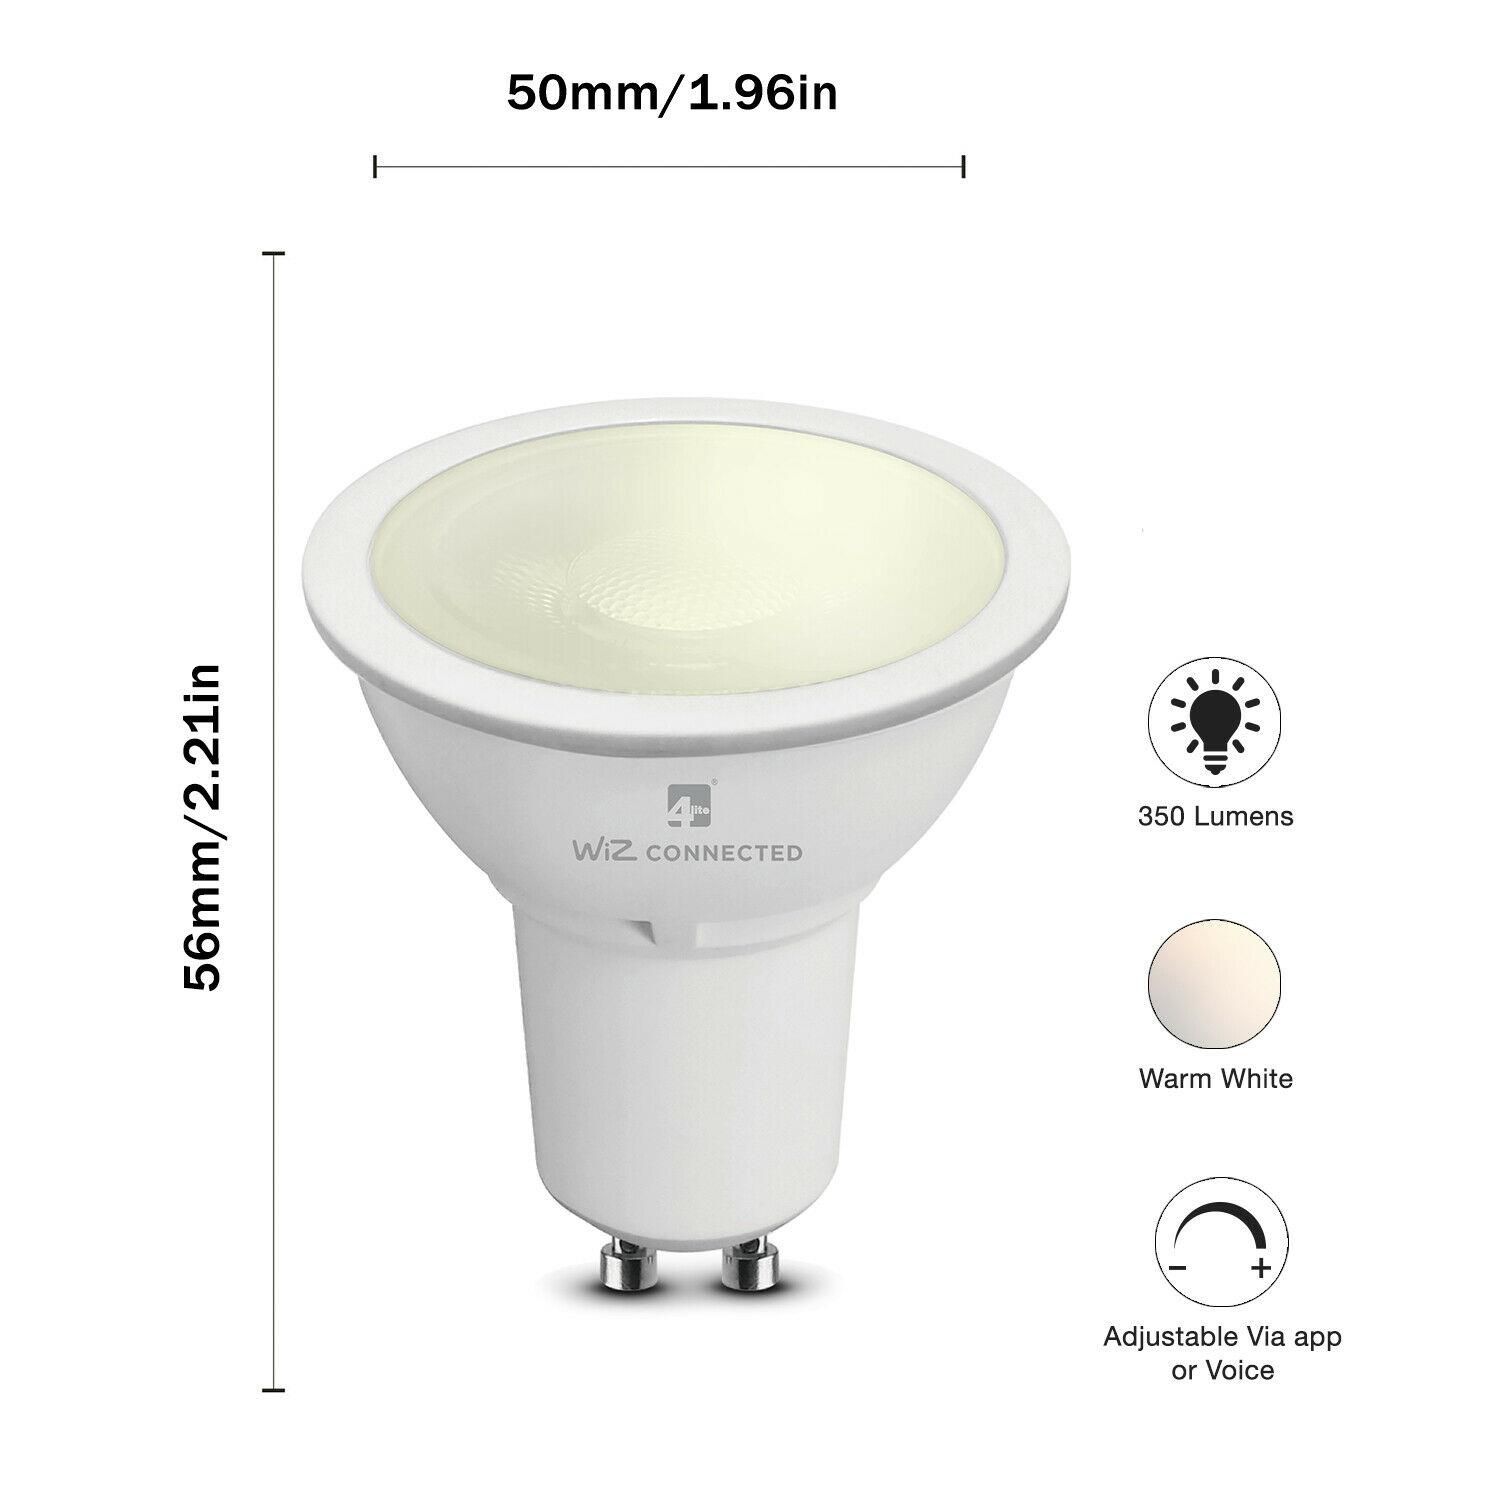 4lite WiZ Connected GU10 White & Dimmable Smart Bulb WiFi. Create a relaxing atmosphere with a warm, cosy white colour. Dimmable via the WiZ app, added functionality includes setting schedules, providing added home security, night lights, save energy and much more!

Features : 

LED 5.5W - equivalent to 50W
Can Be Controlled via the WiZ App and Voice Controlled Smart Devices - Google, Alexa, Siri, Samsung Smart Things
Warm White 2700K - 350 lumens
LED lifetime 25,000 hours
50,000 switching cycles
Dimmable via the Wiz app
Warm White 2700K

Power and Connectivity : 

220-240V 50Hz
5.5W 45mA
Encrypted cloud connection with TLS 1.2 security protocol
Amazon Web Services, pre-subscribed for product’s lifetime
Anonymous sign-in
OAuth 2.0 secured framework
Connection to WiFi on 2.4 GHz frequency mode for wider coverage
32-bit CPU
2 slots for maximum reliability during auto-updates
Physical : 

White
GU10 base type
Heatsink: aluminium and electrophoresis white
Bulb: frosted
Package Includes : 3 Pack of 4lite WiZ Connected GU10 White & Dimmable Smart Bulb WiFi